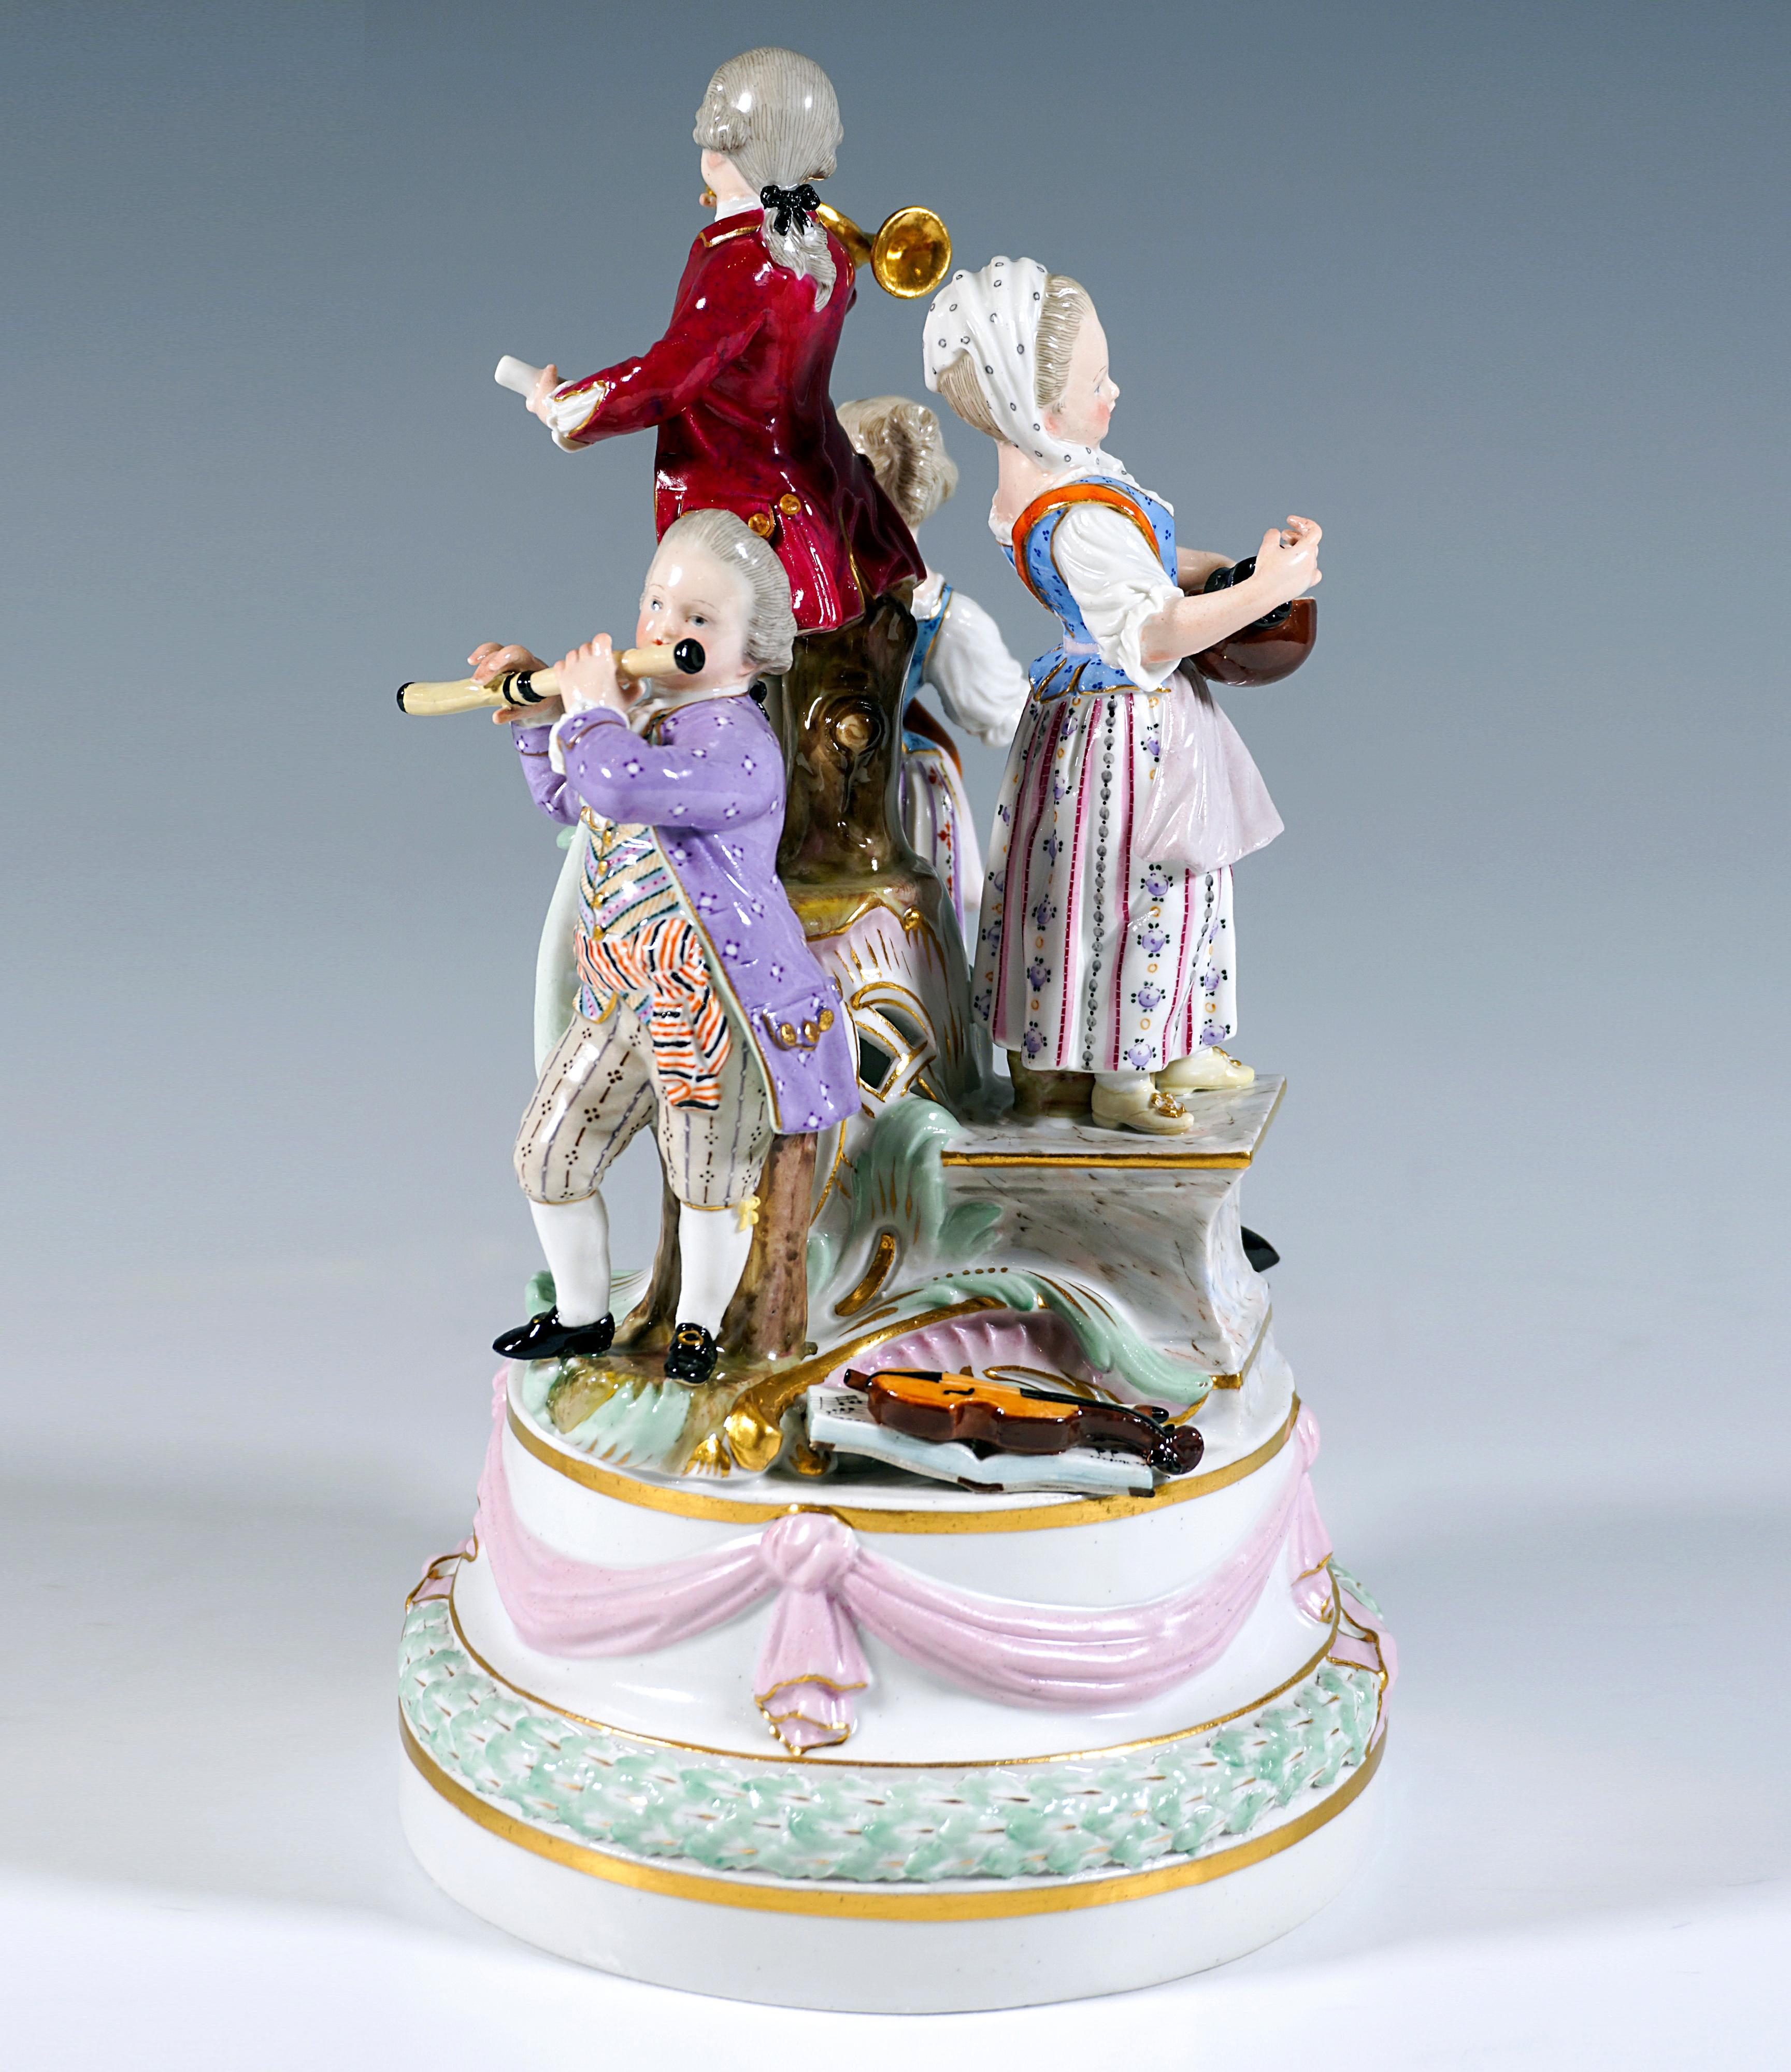 Excellent Meissen piece from the time the model was created:
Four children in festive rural rococo dress on a high, stepped round pedestal, decorated with a leaf wreath and bow festoon with gold ornamentation, on the pedestal further pedestals of